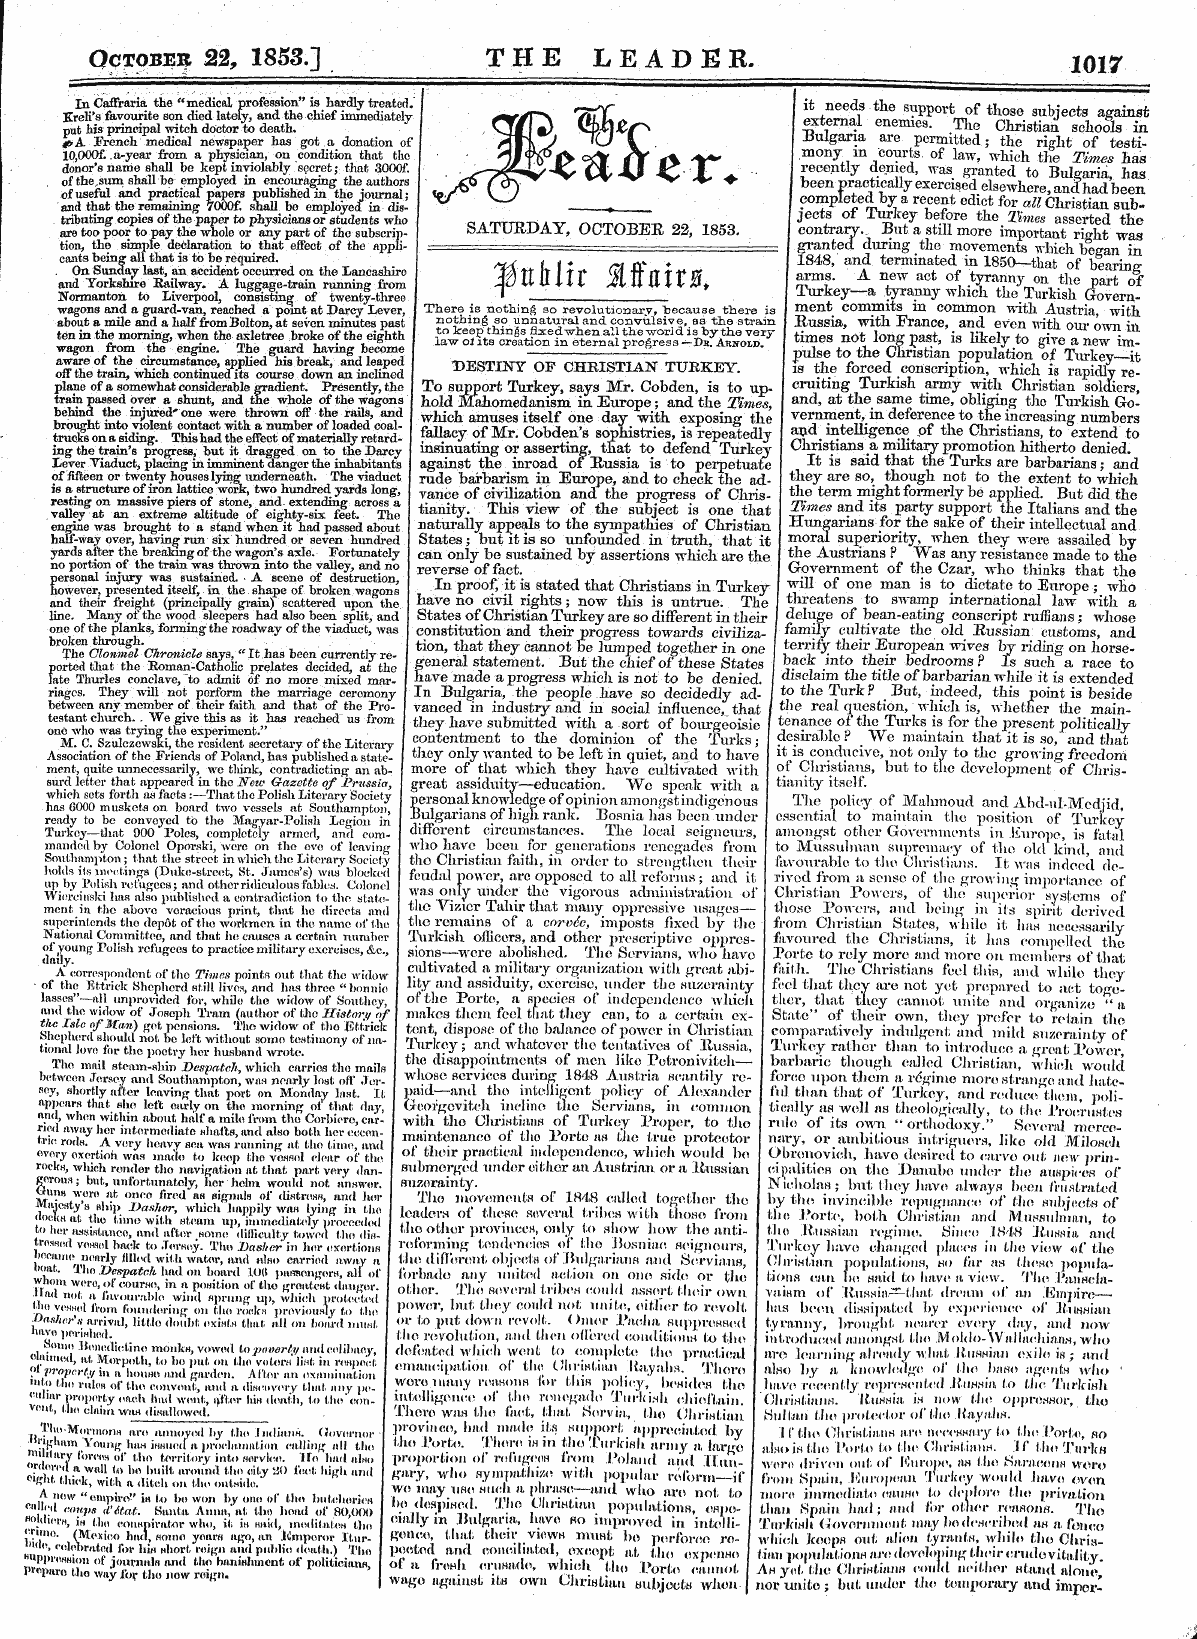 Leader (1850-1860): jS F Y, Country edition - October 22, 1853] The Leade R. 1017